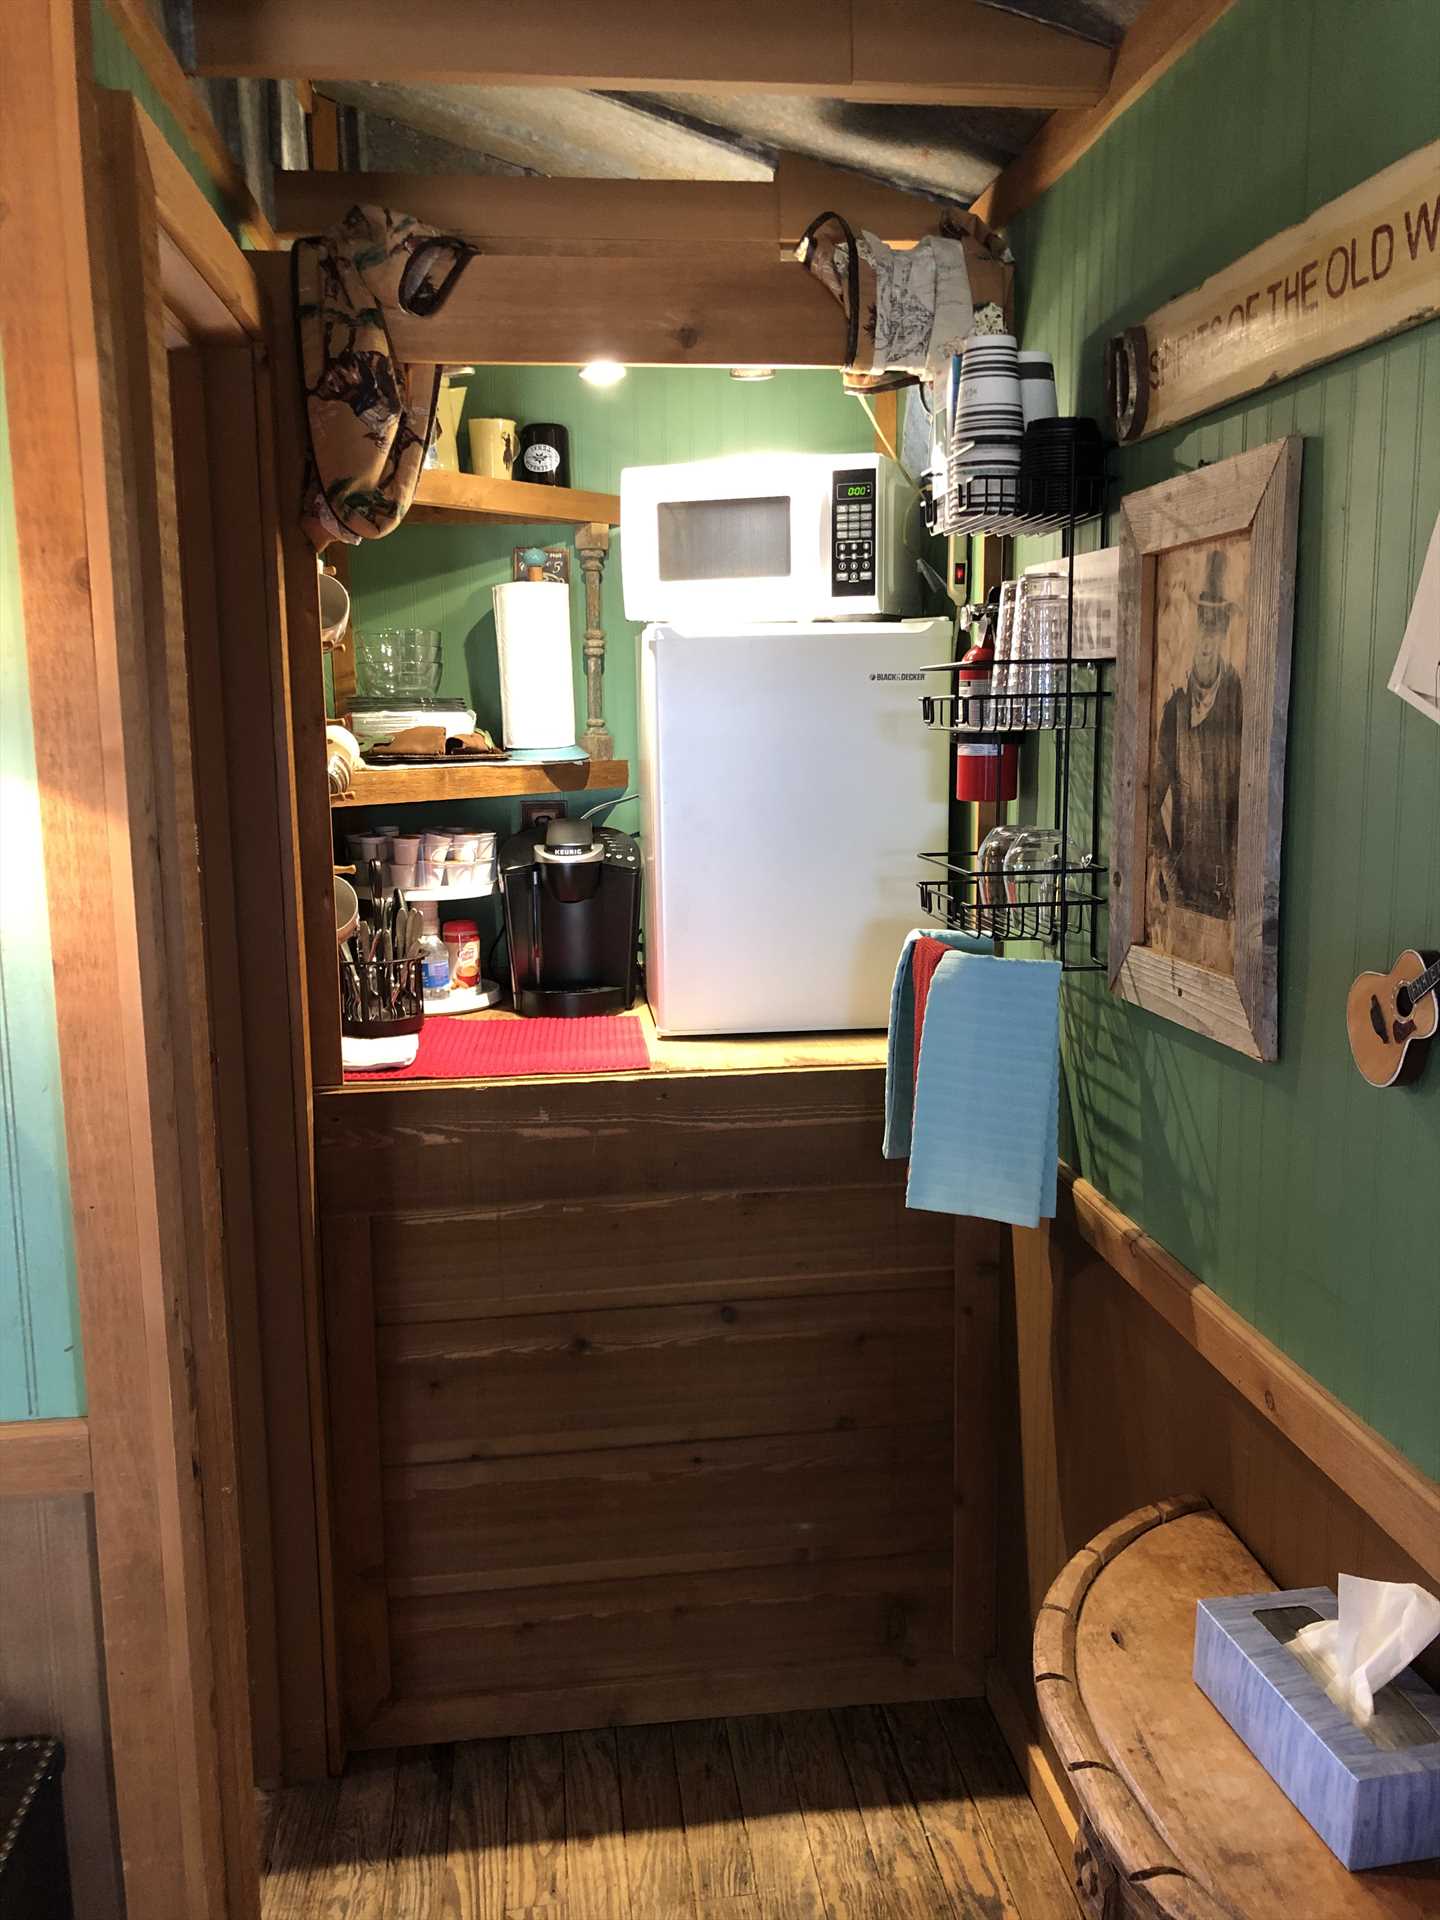                                                 A tidy kitchenette in the cabin provides coffee and snacking basics. The ranch's pavilion (which all guests are free to use) offers many more appliances and cooking opportunities.